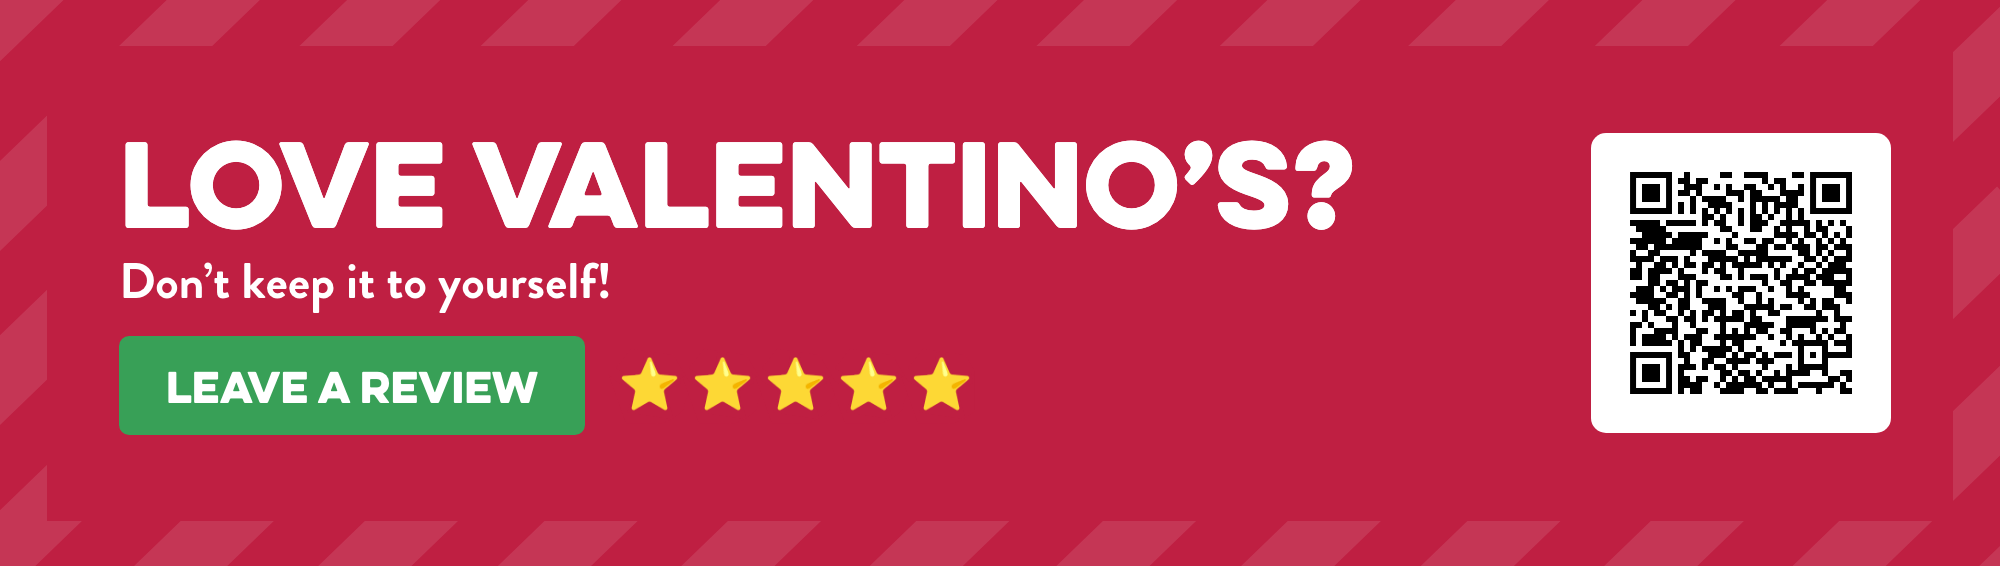 Valentinos-Leave-Review-min